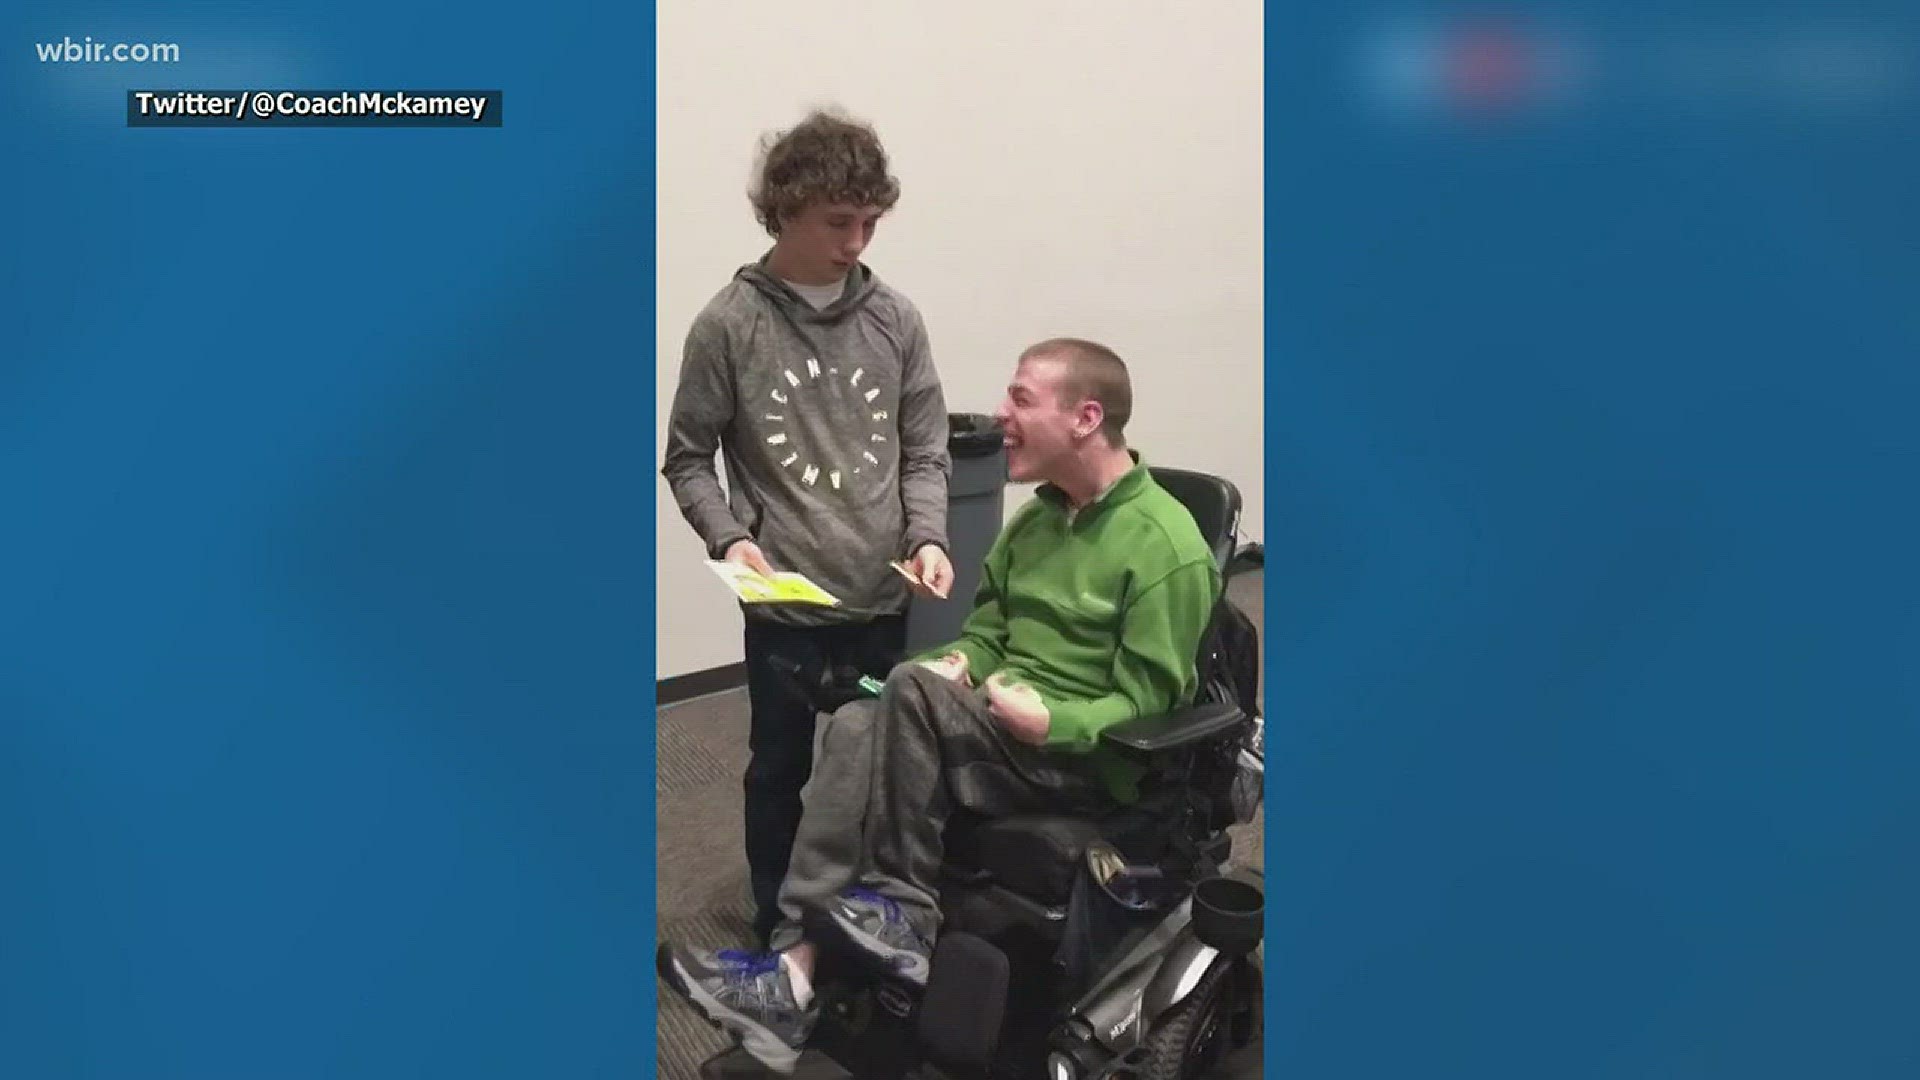 A Clinton football player surprises the coach's son with UT basketball tickets.